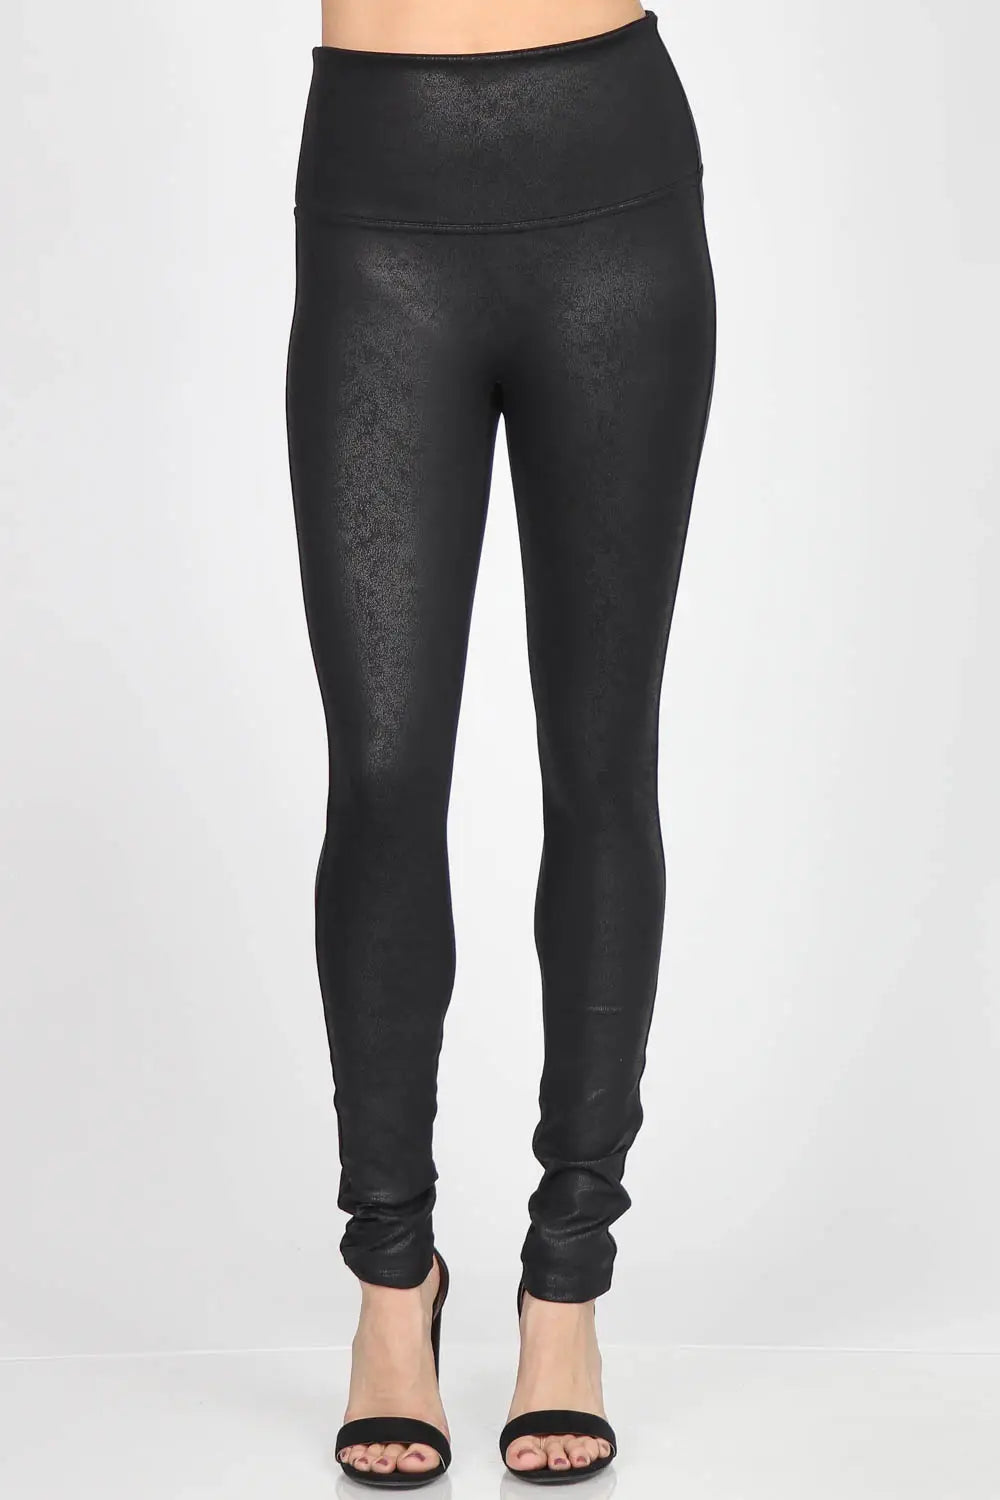 Antique Leatherette Leggings – Southern Fried Glam